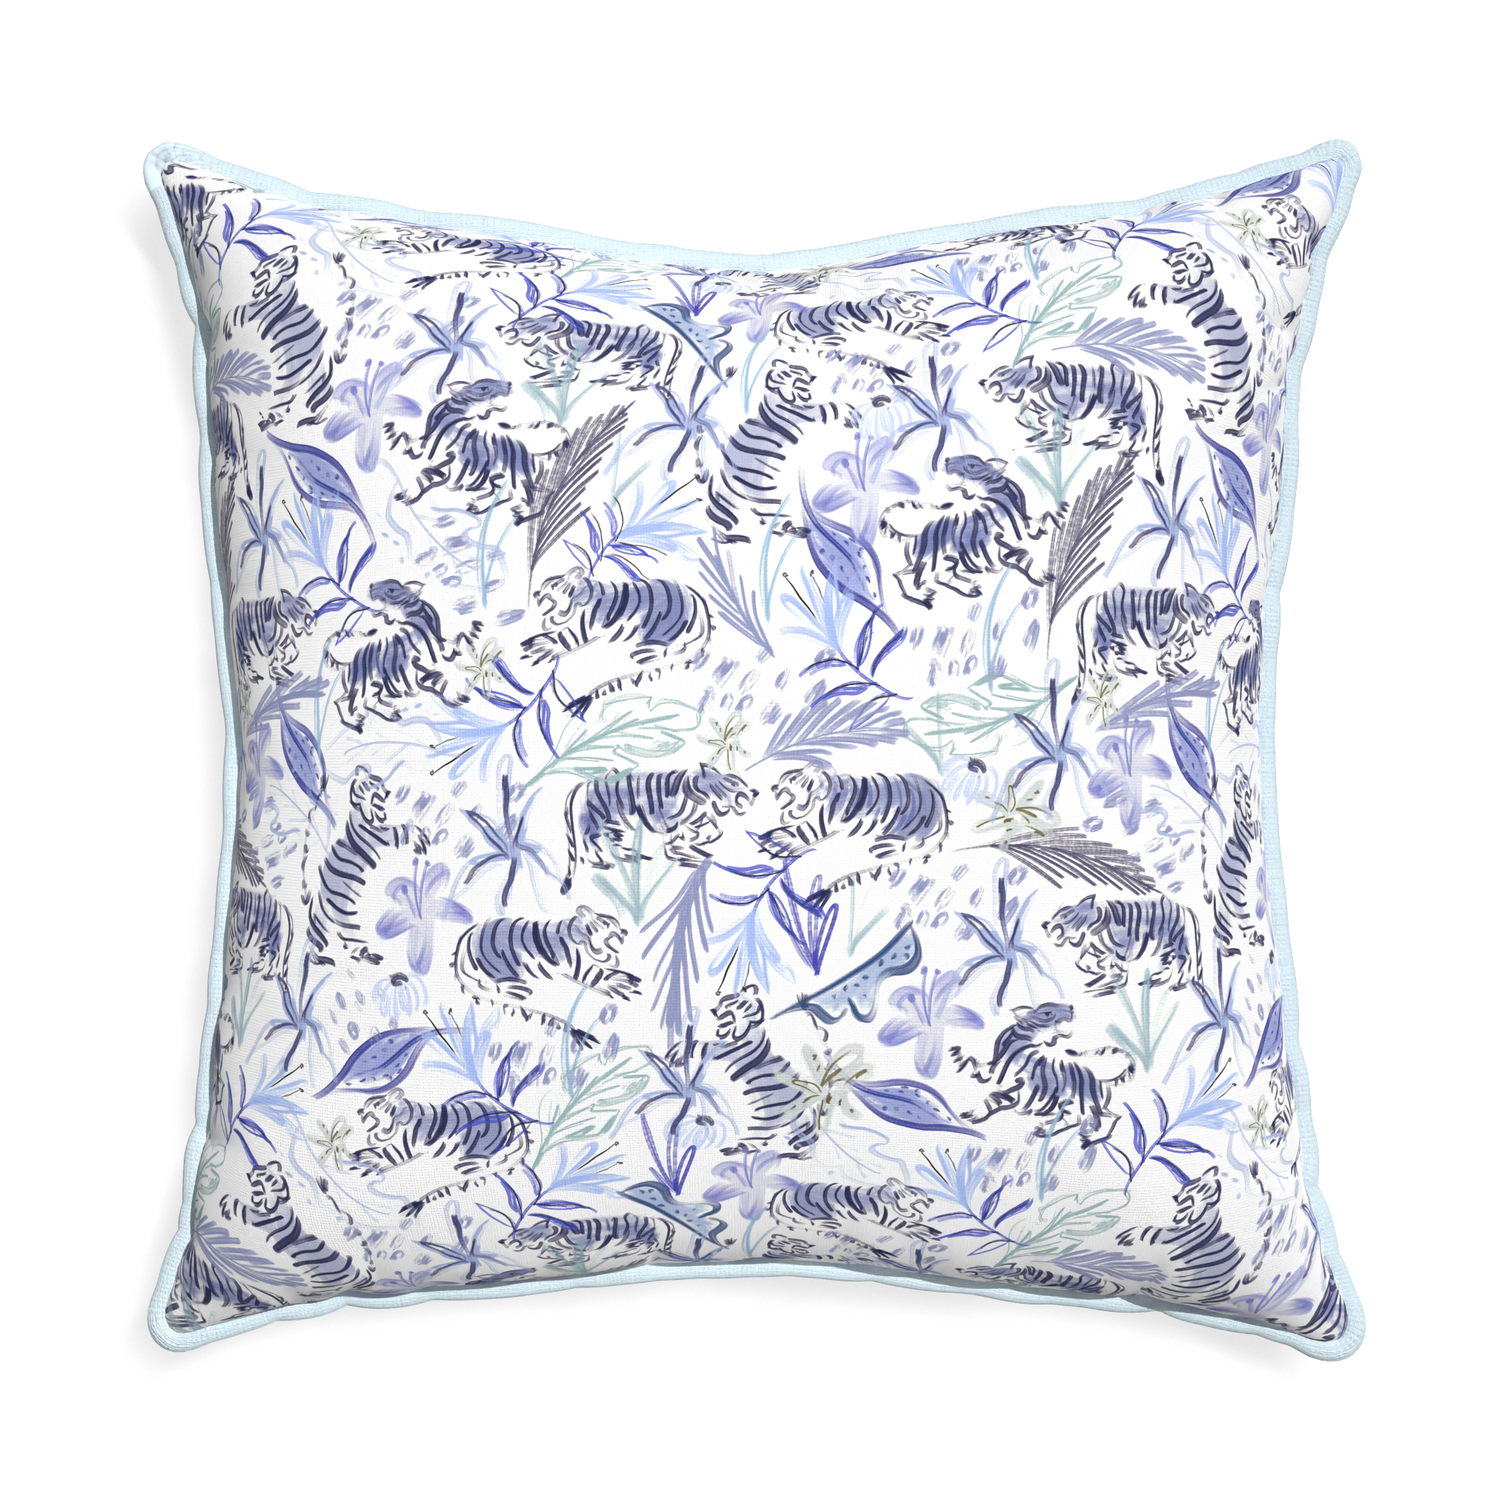 Euro-sham frida blue custom blue with intricate tiger designpillow with powder piping on white background